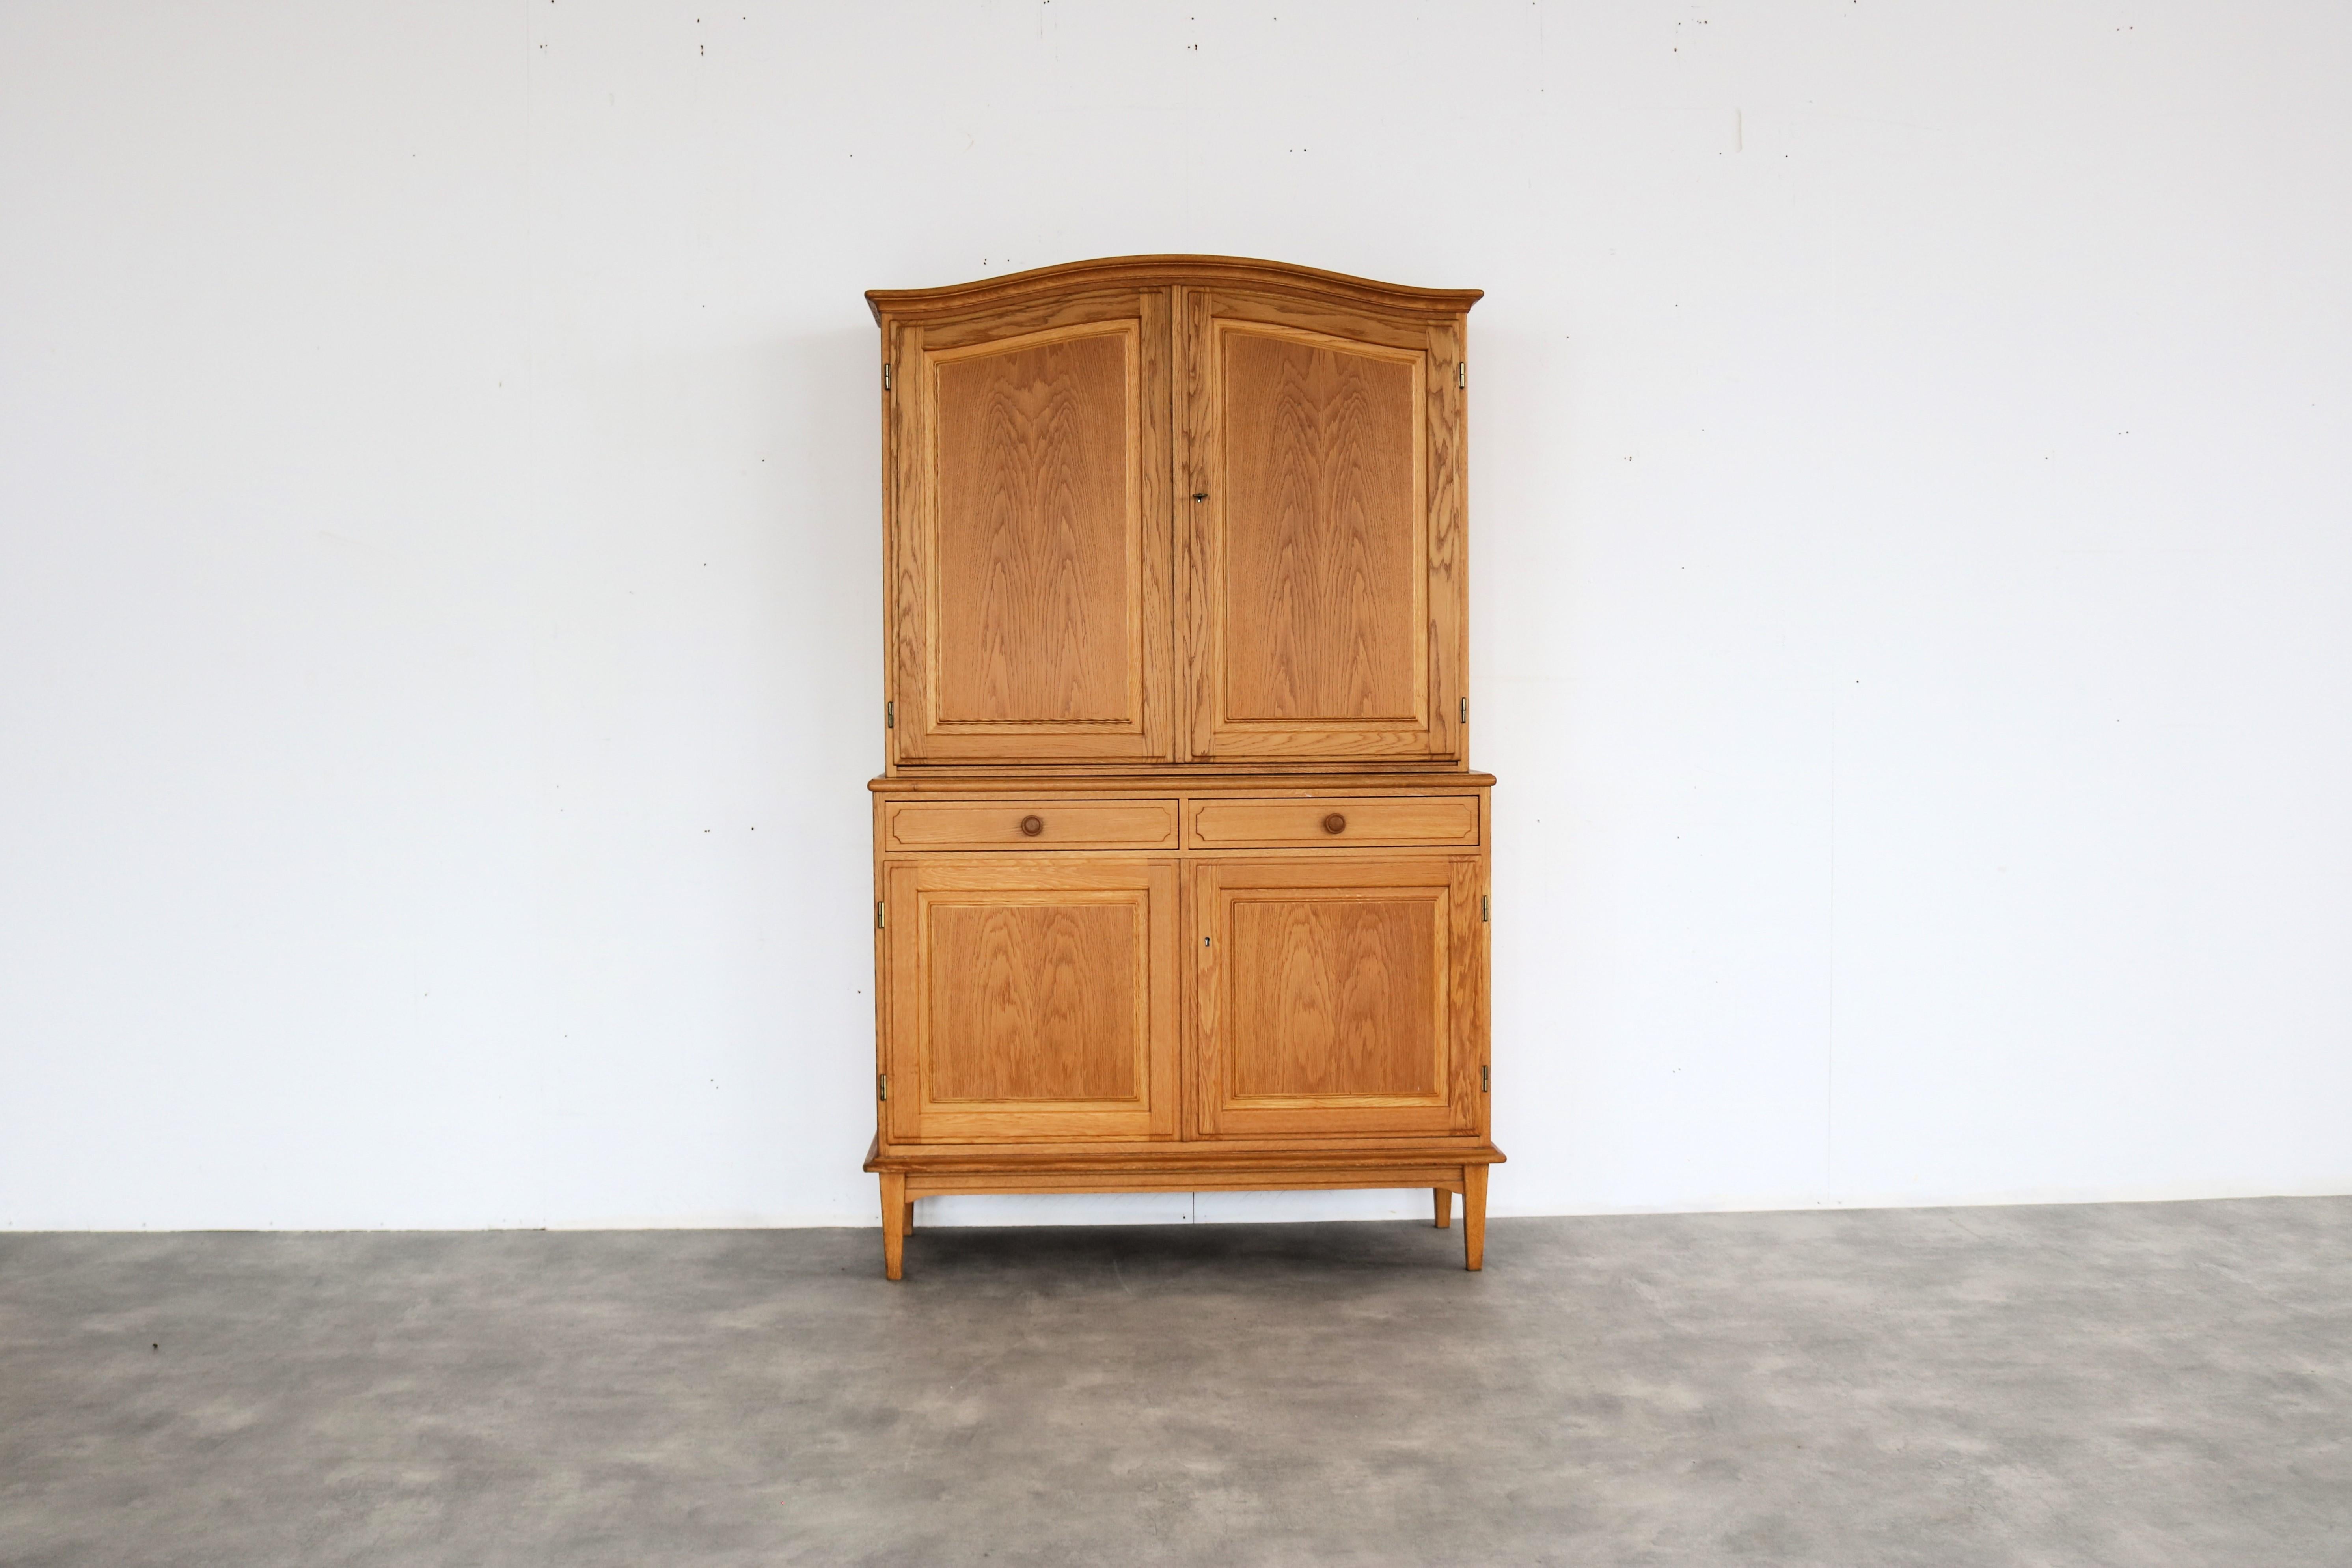 vintage sideboard  wall cupboard  60s  Swedish

period  60's
design  unknown  Sweden
condition  good  light signs of use
size  172 x 108 x 45 (hxwxd)

details  teak; oak;

article number  2284